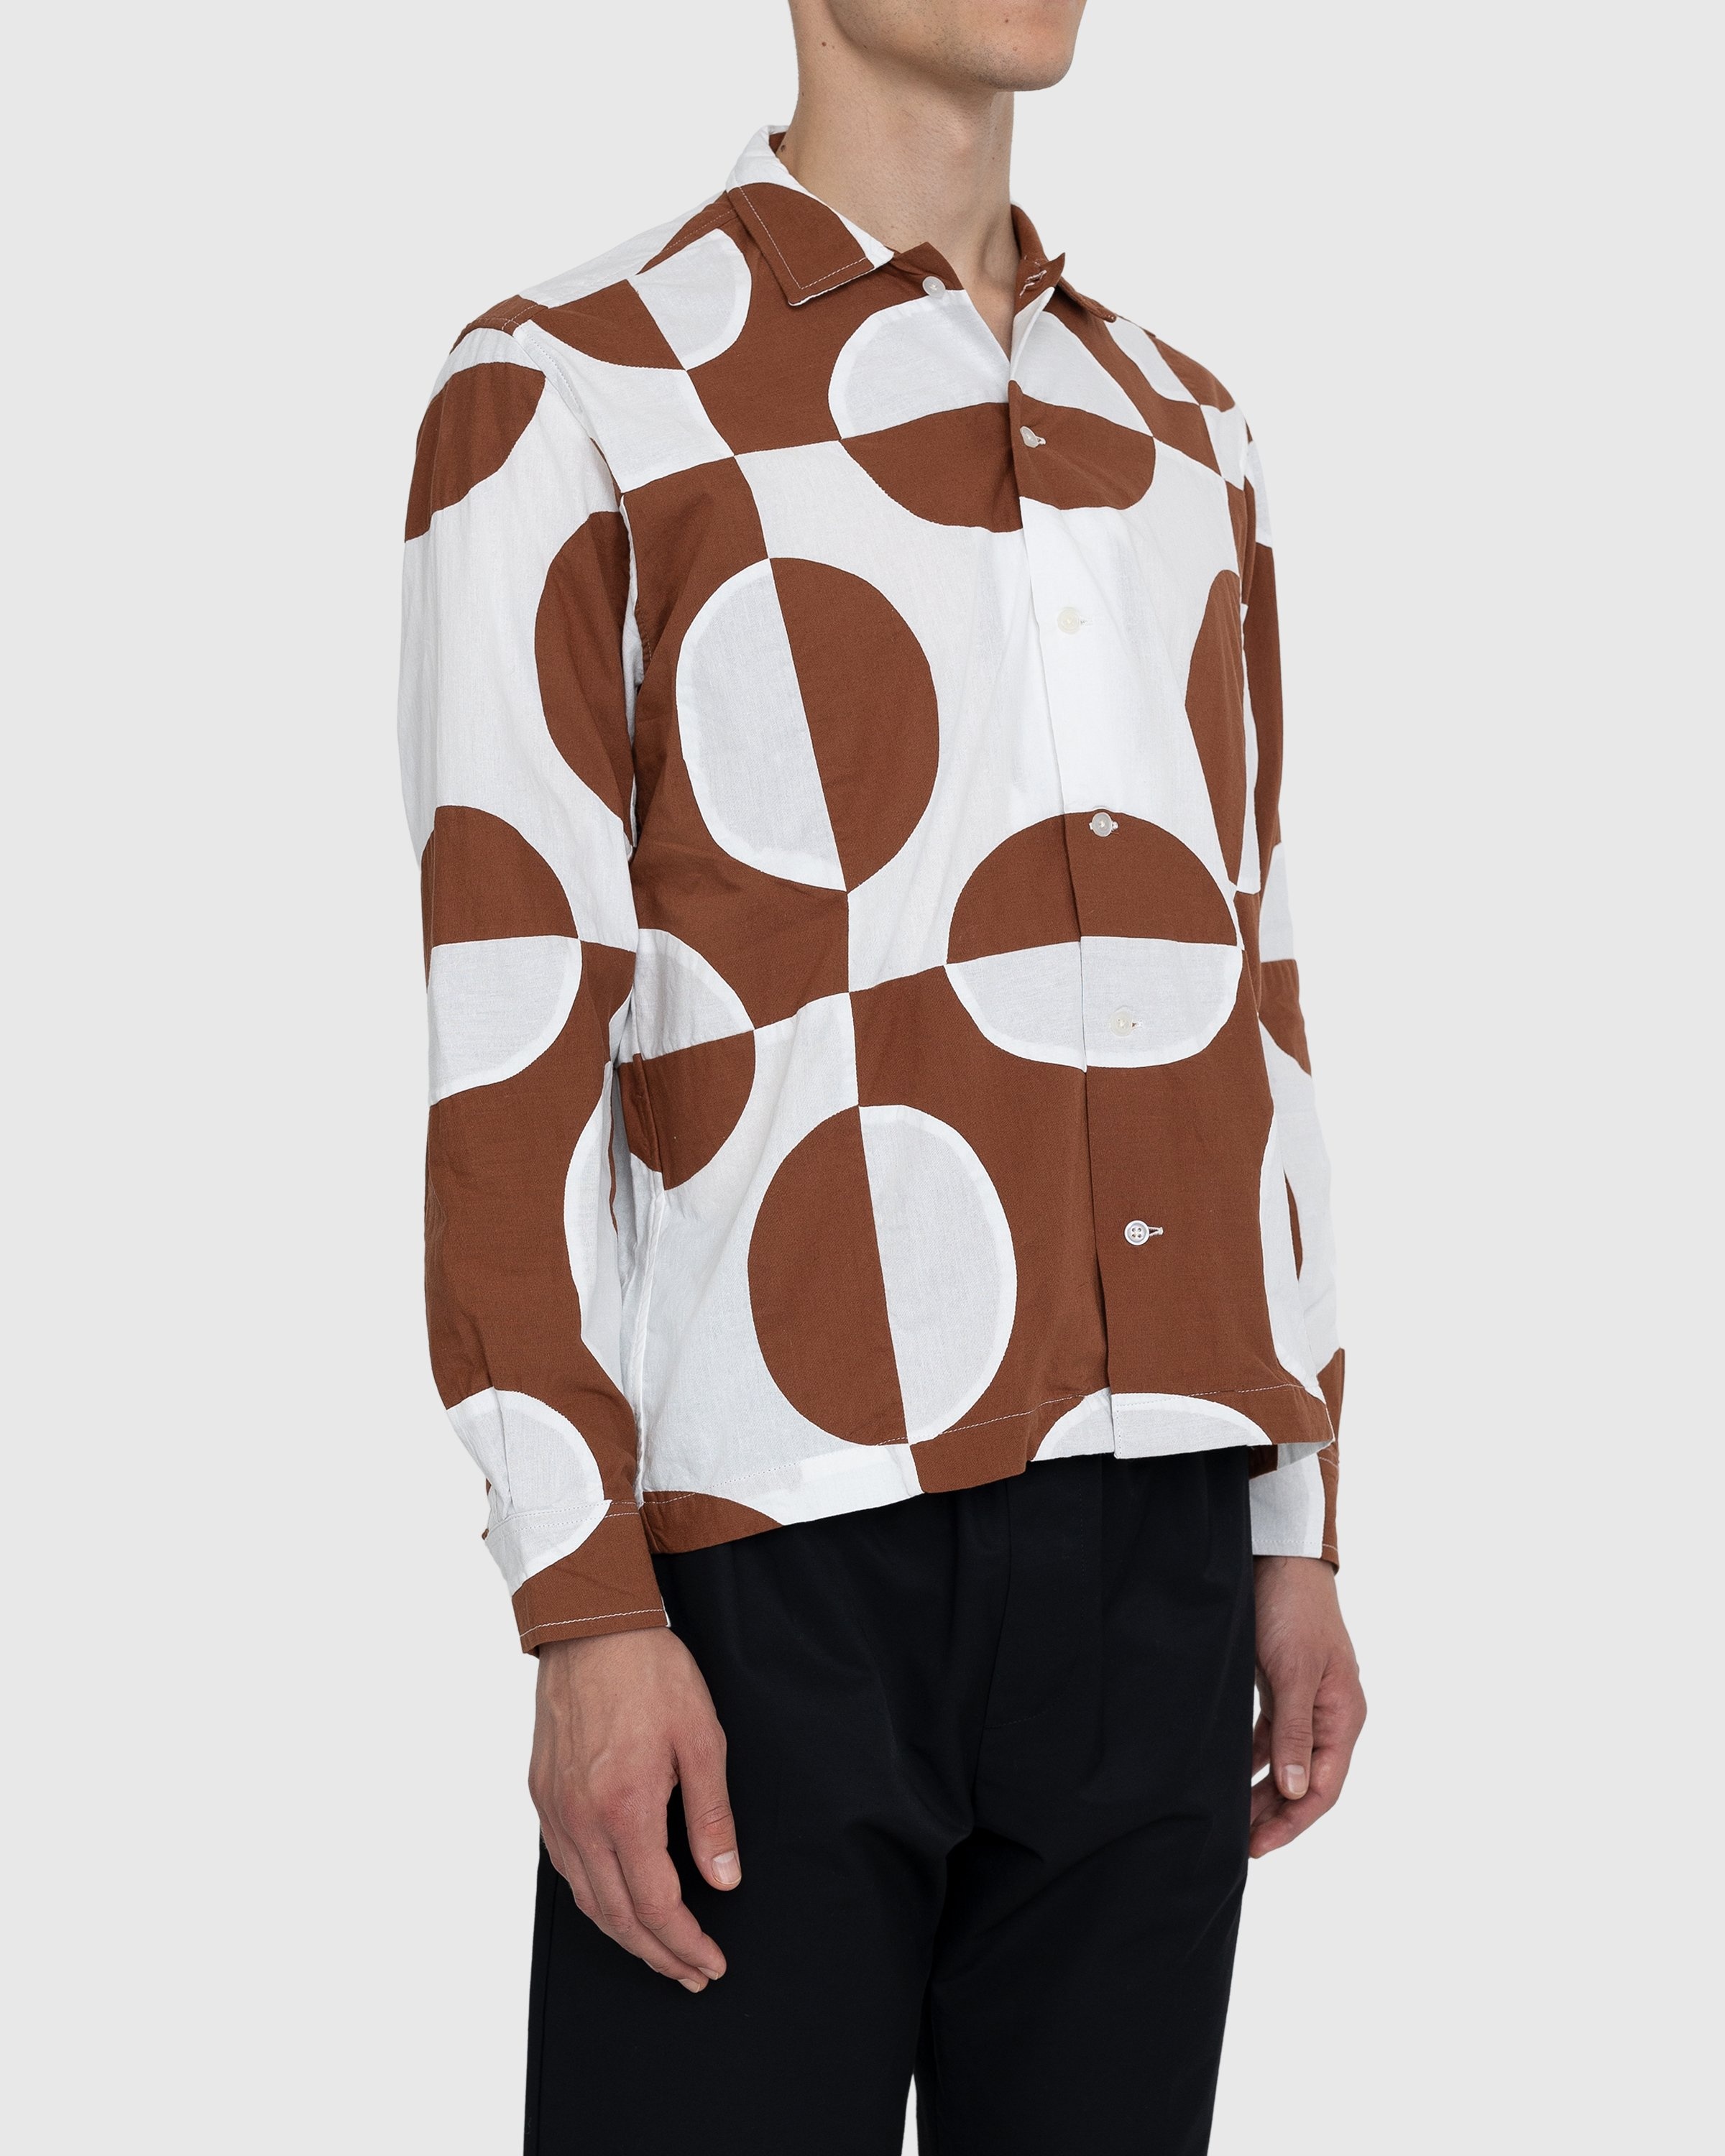 Bode – Duo Oval Patchwork Long-Sleeve Shirt Brown - Longsleeve Shirts - Multi - Image 3